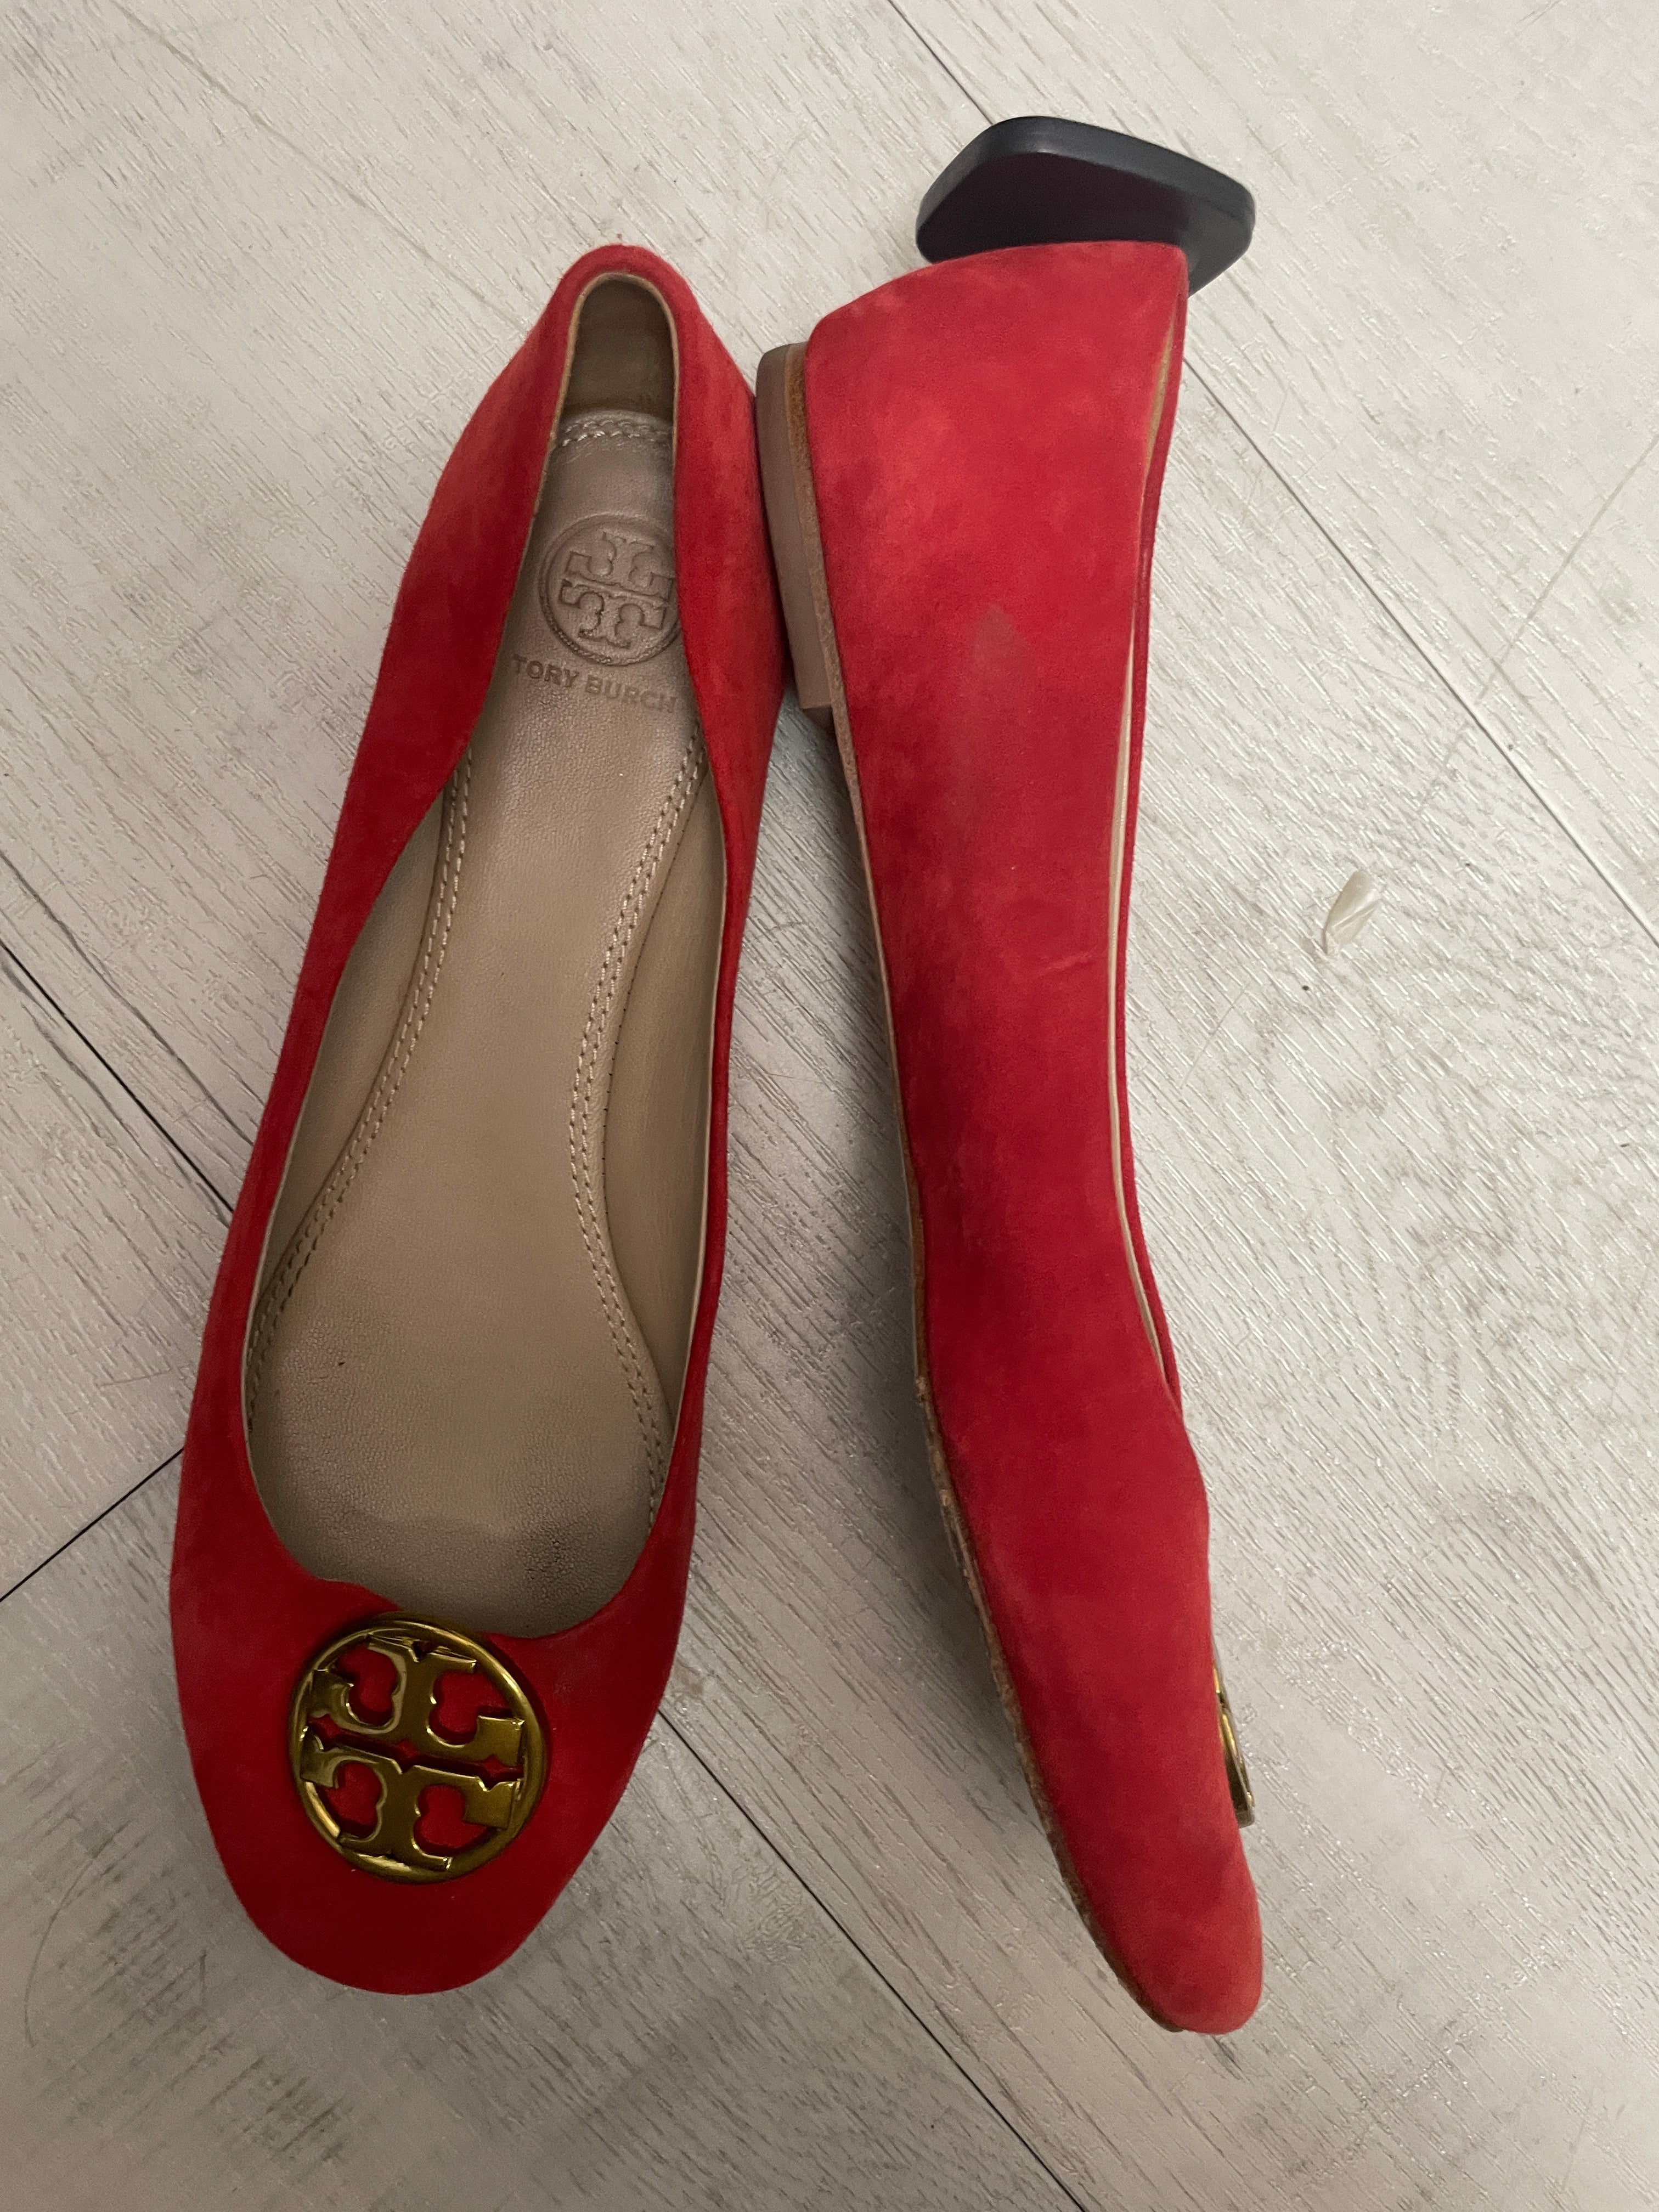 Shoes Designer By Tory Burch Size:  – Clothes Mentor Ft Myers FL #168